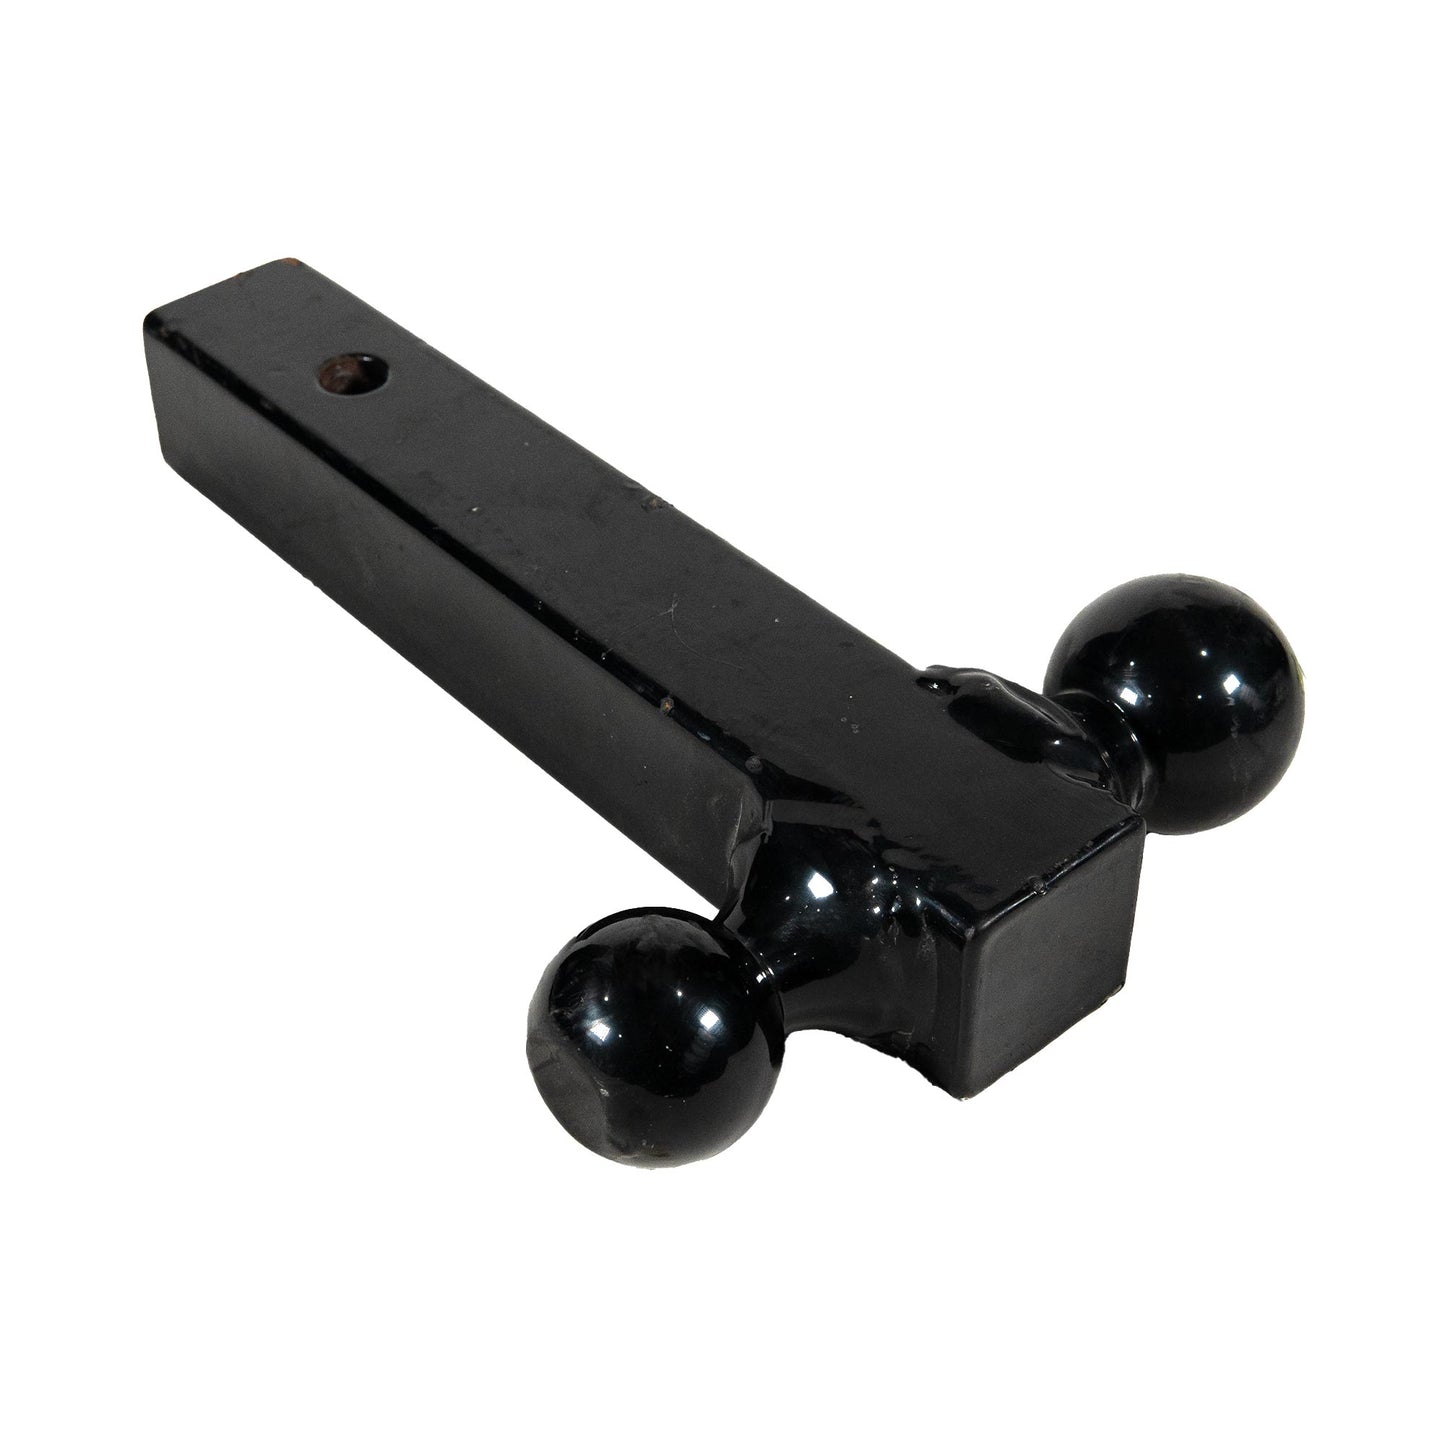 Trailer Two Dual Hitch Ball Mount (7.5 10k Capacity)